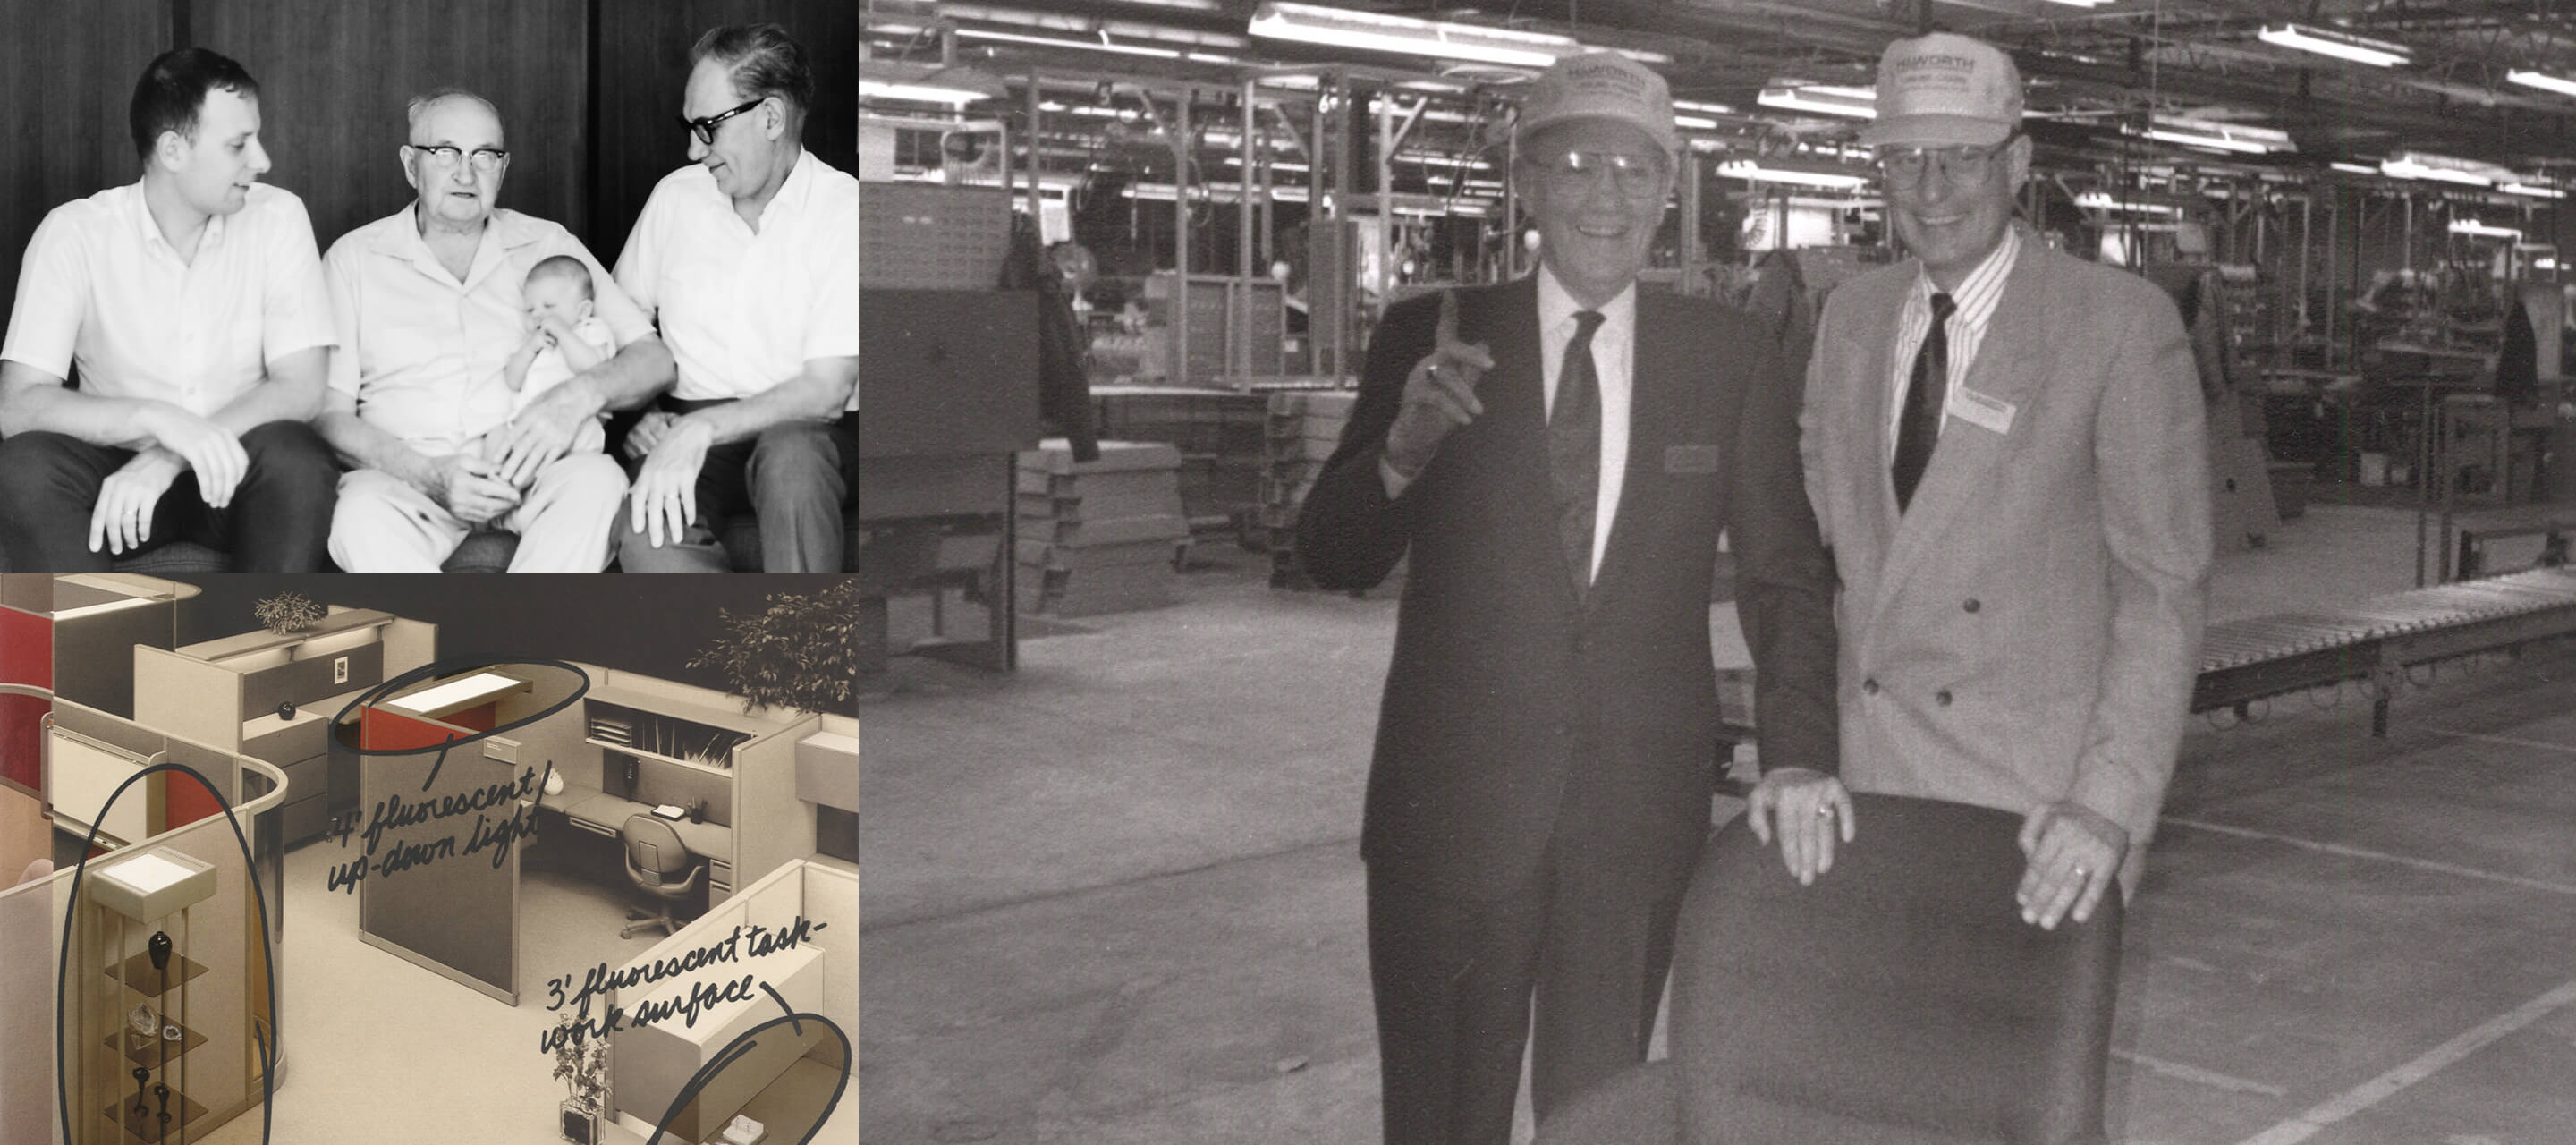 1960s​—​G.W.’s son, Dick, returns from the army in 1969 and assumes responsibility for manufacturing and new product development. His goal is to produce an ofﬁce module system. ​Dick would go on to lead the company as Chairman from 1994-2009, until his son Matthew assumes responsibility.